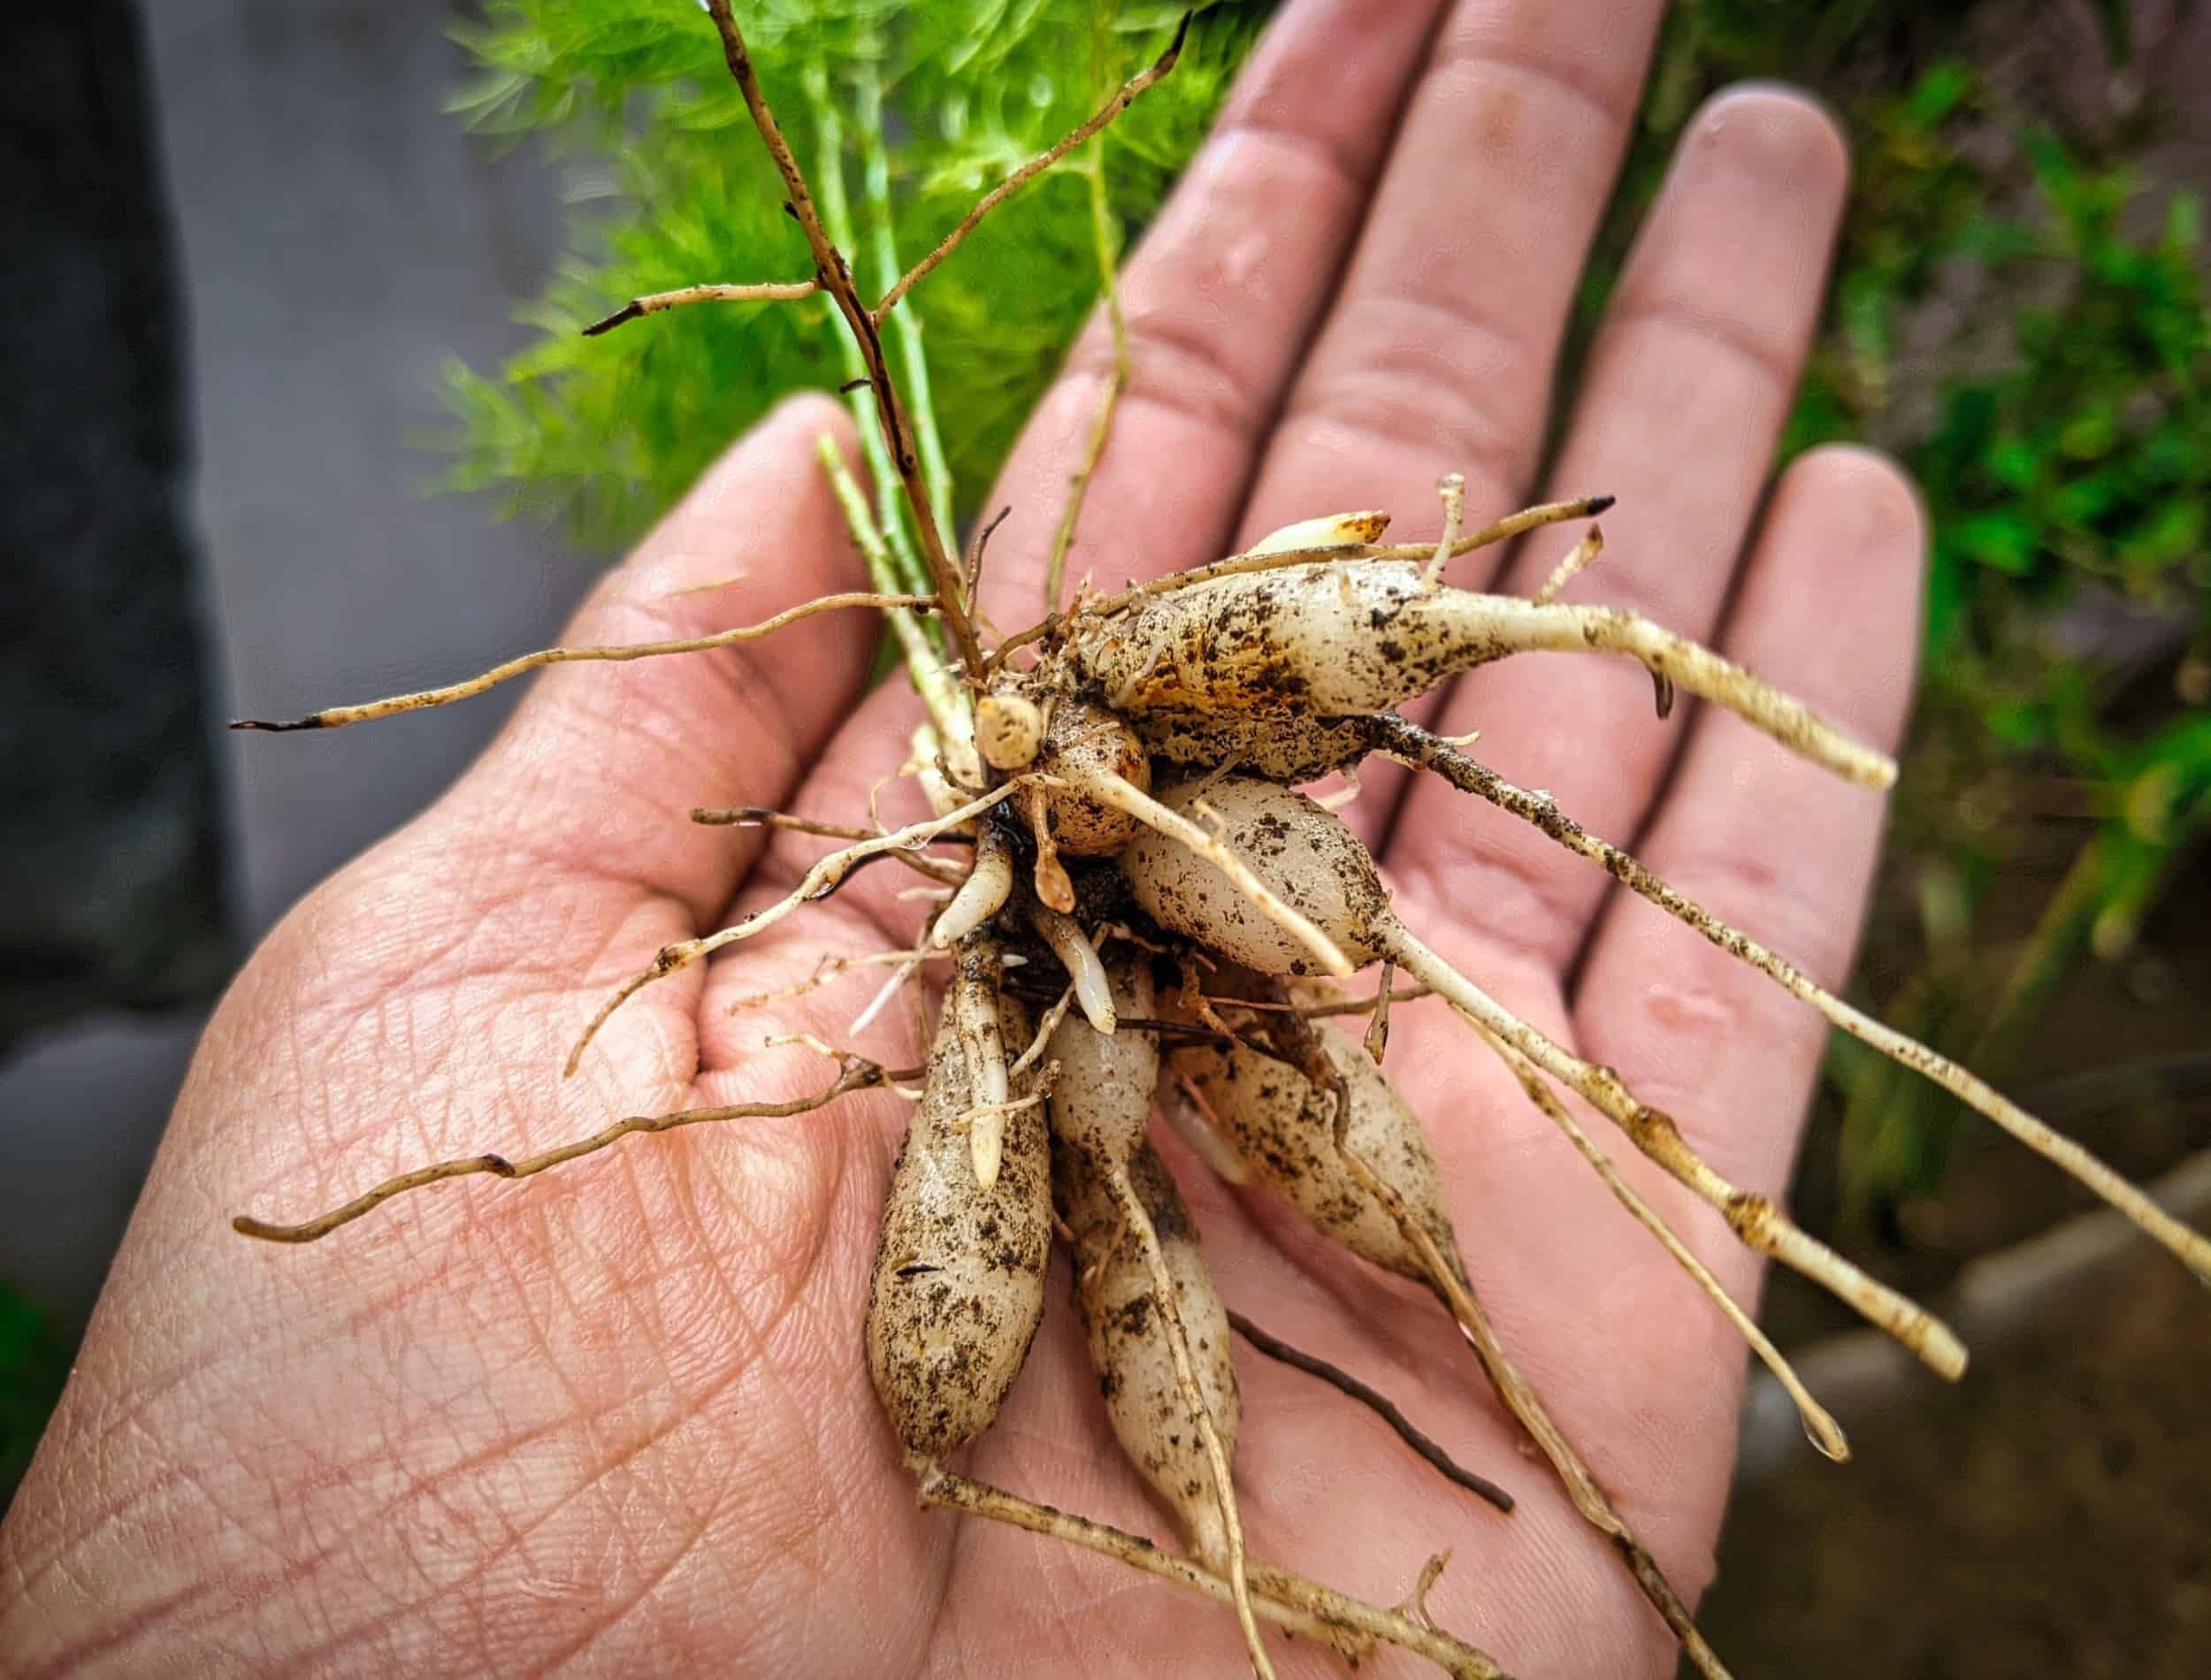 Asparagus racemosus or Shatavari botanical herb in India. Hand holding of roots of Asparagus racemosus. Tonic herb for women Helps balance the female hormonal system.